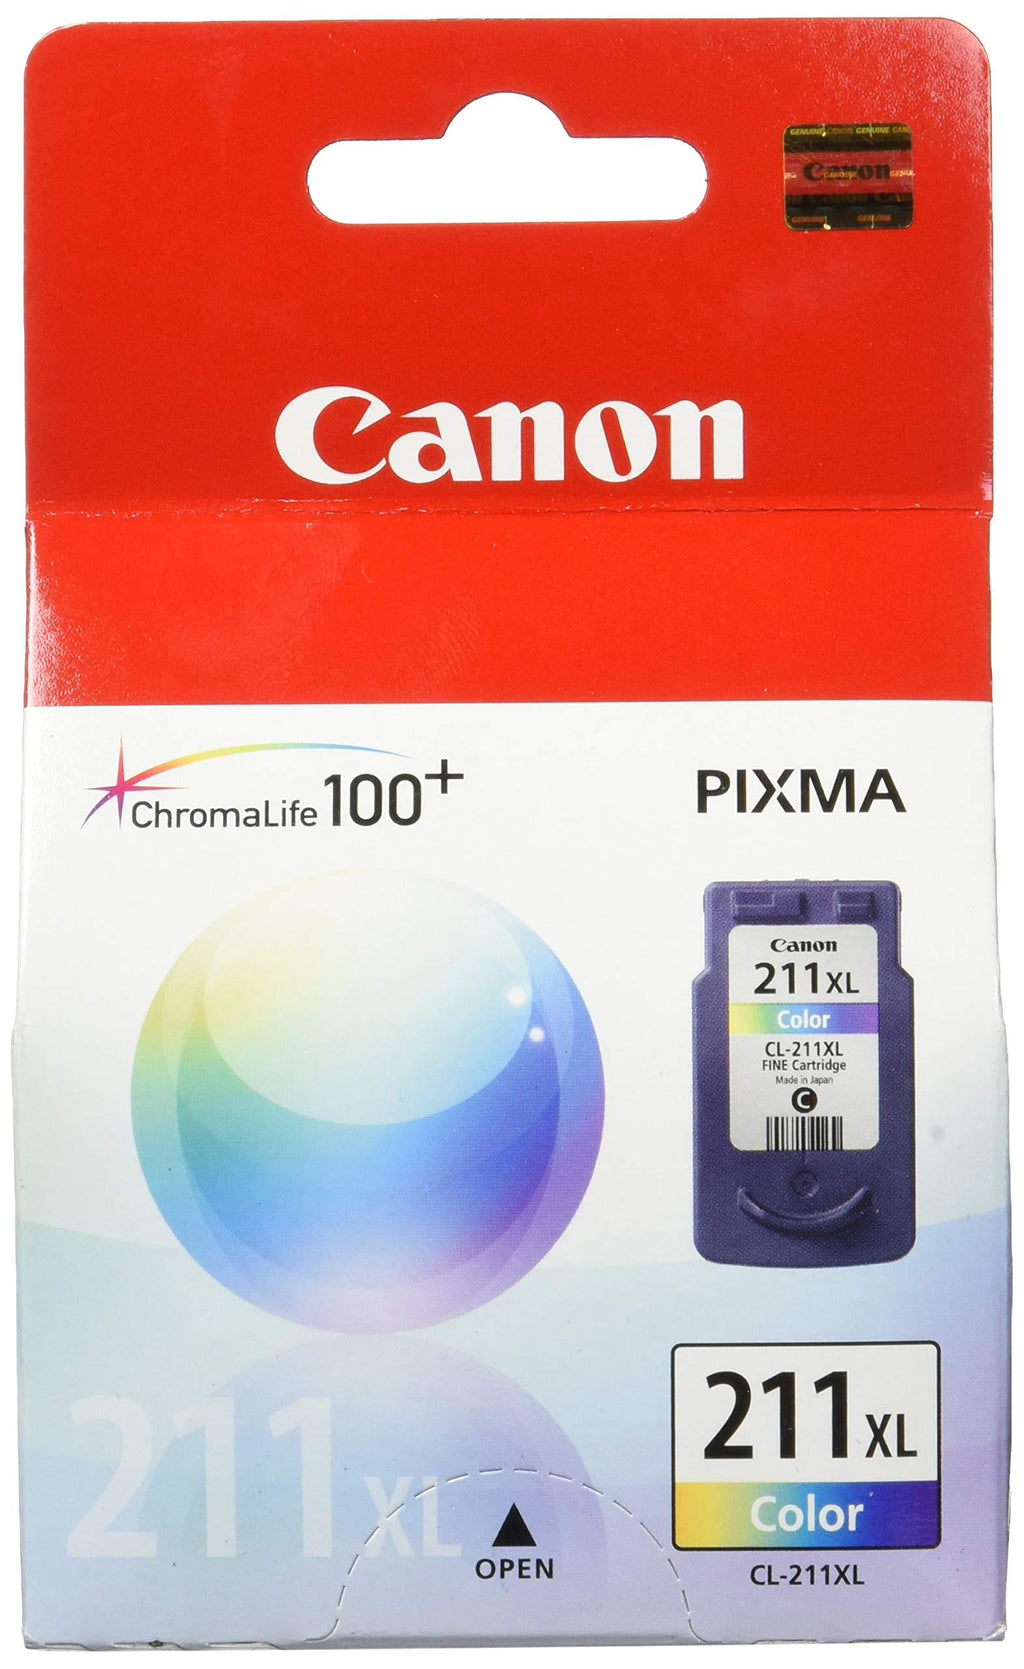 Canon CL-211XL 2975B001 PIXMA iP2700 iP2702 MP230 MP235 MP240 MP250 MP260 MP270 MP280 MP282 MP480 MP490 MP495 MP499 MX320 MX330 MX340 MX350 MX360 MX410 MX420 Ink Cartridge (Color) in Retail Packaging Canon Cl-211Xl High-Yield Ink - LeoForward Australia